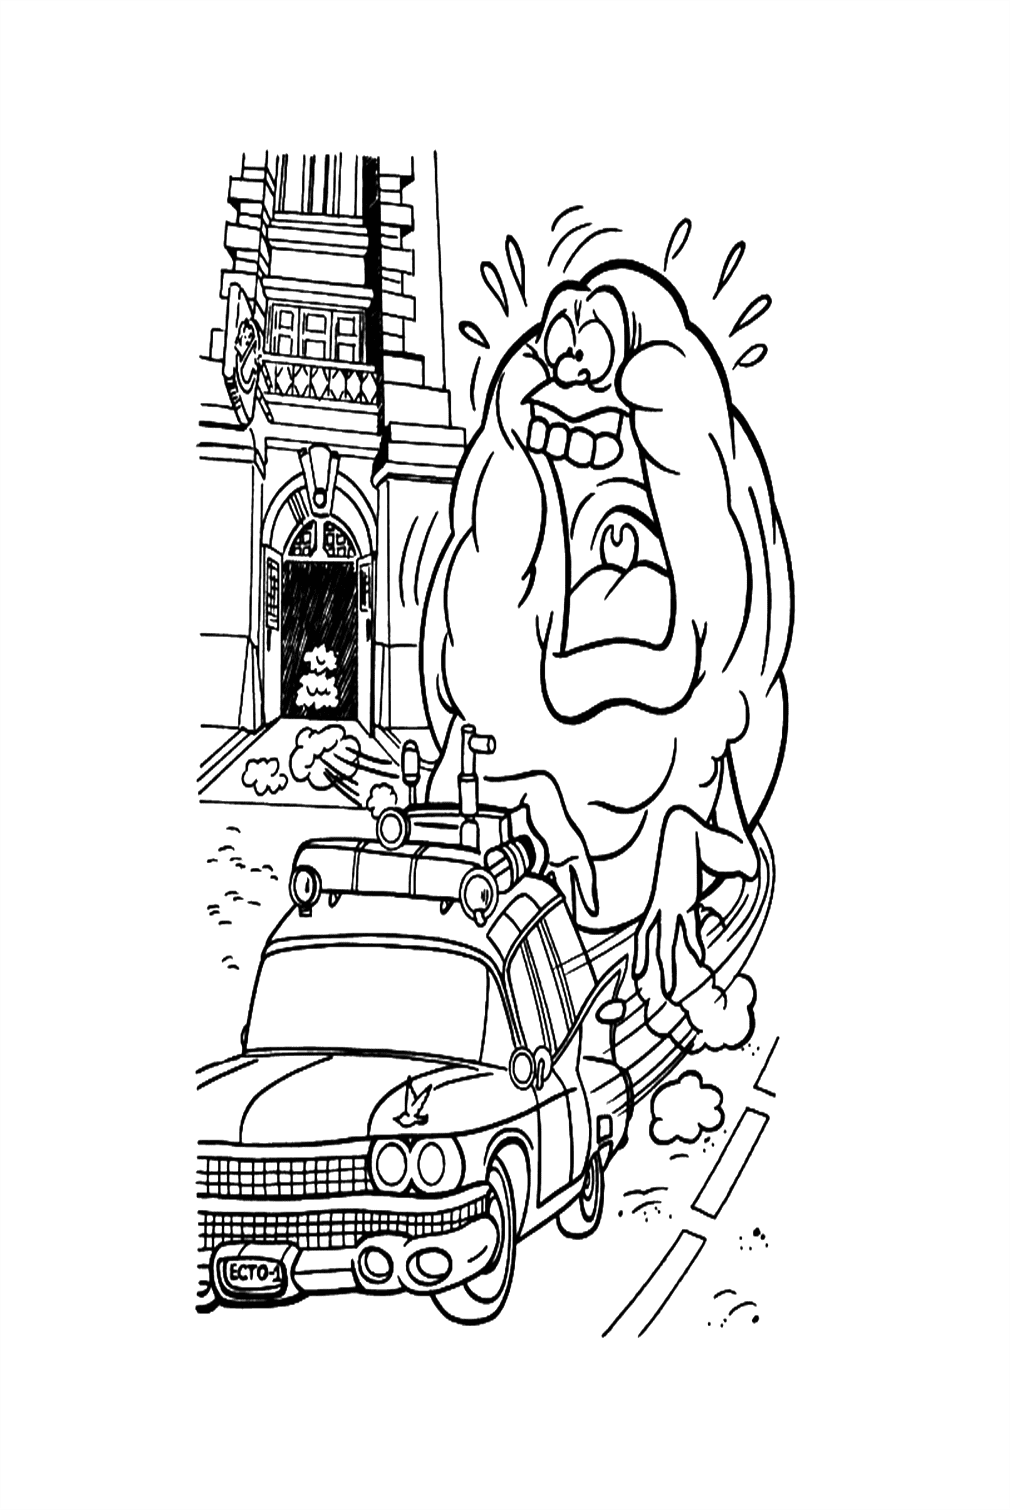 A Huge Ghost In Haunted House Coloring Pages